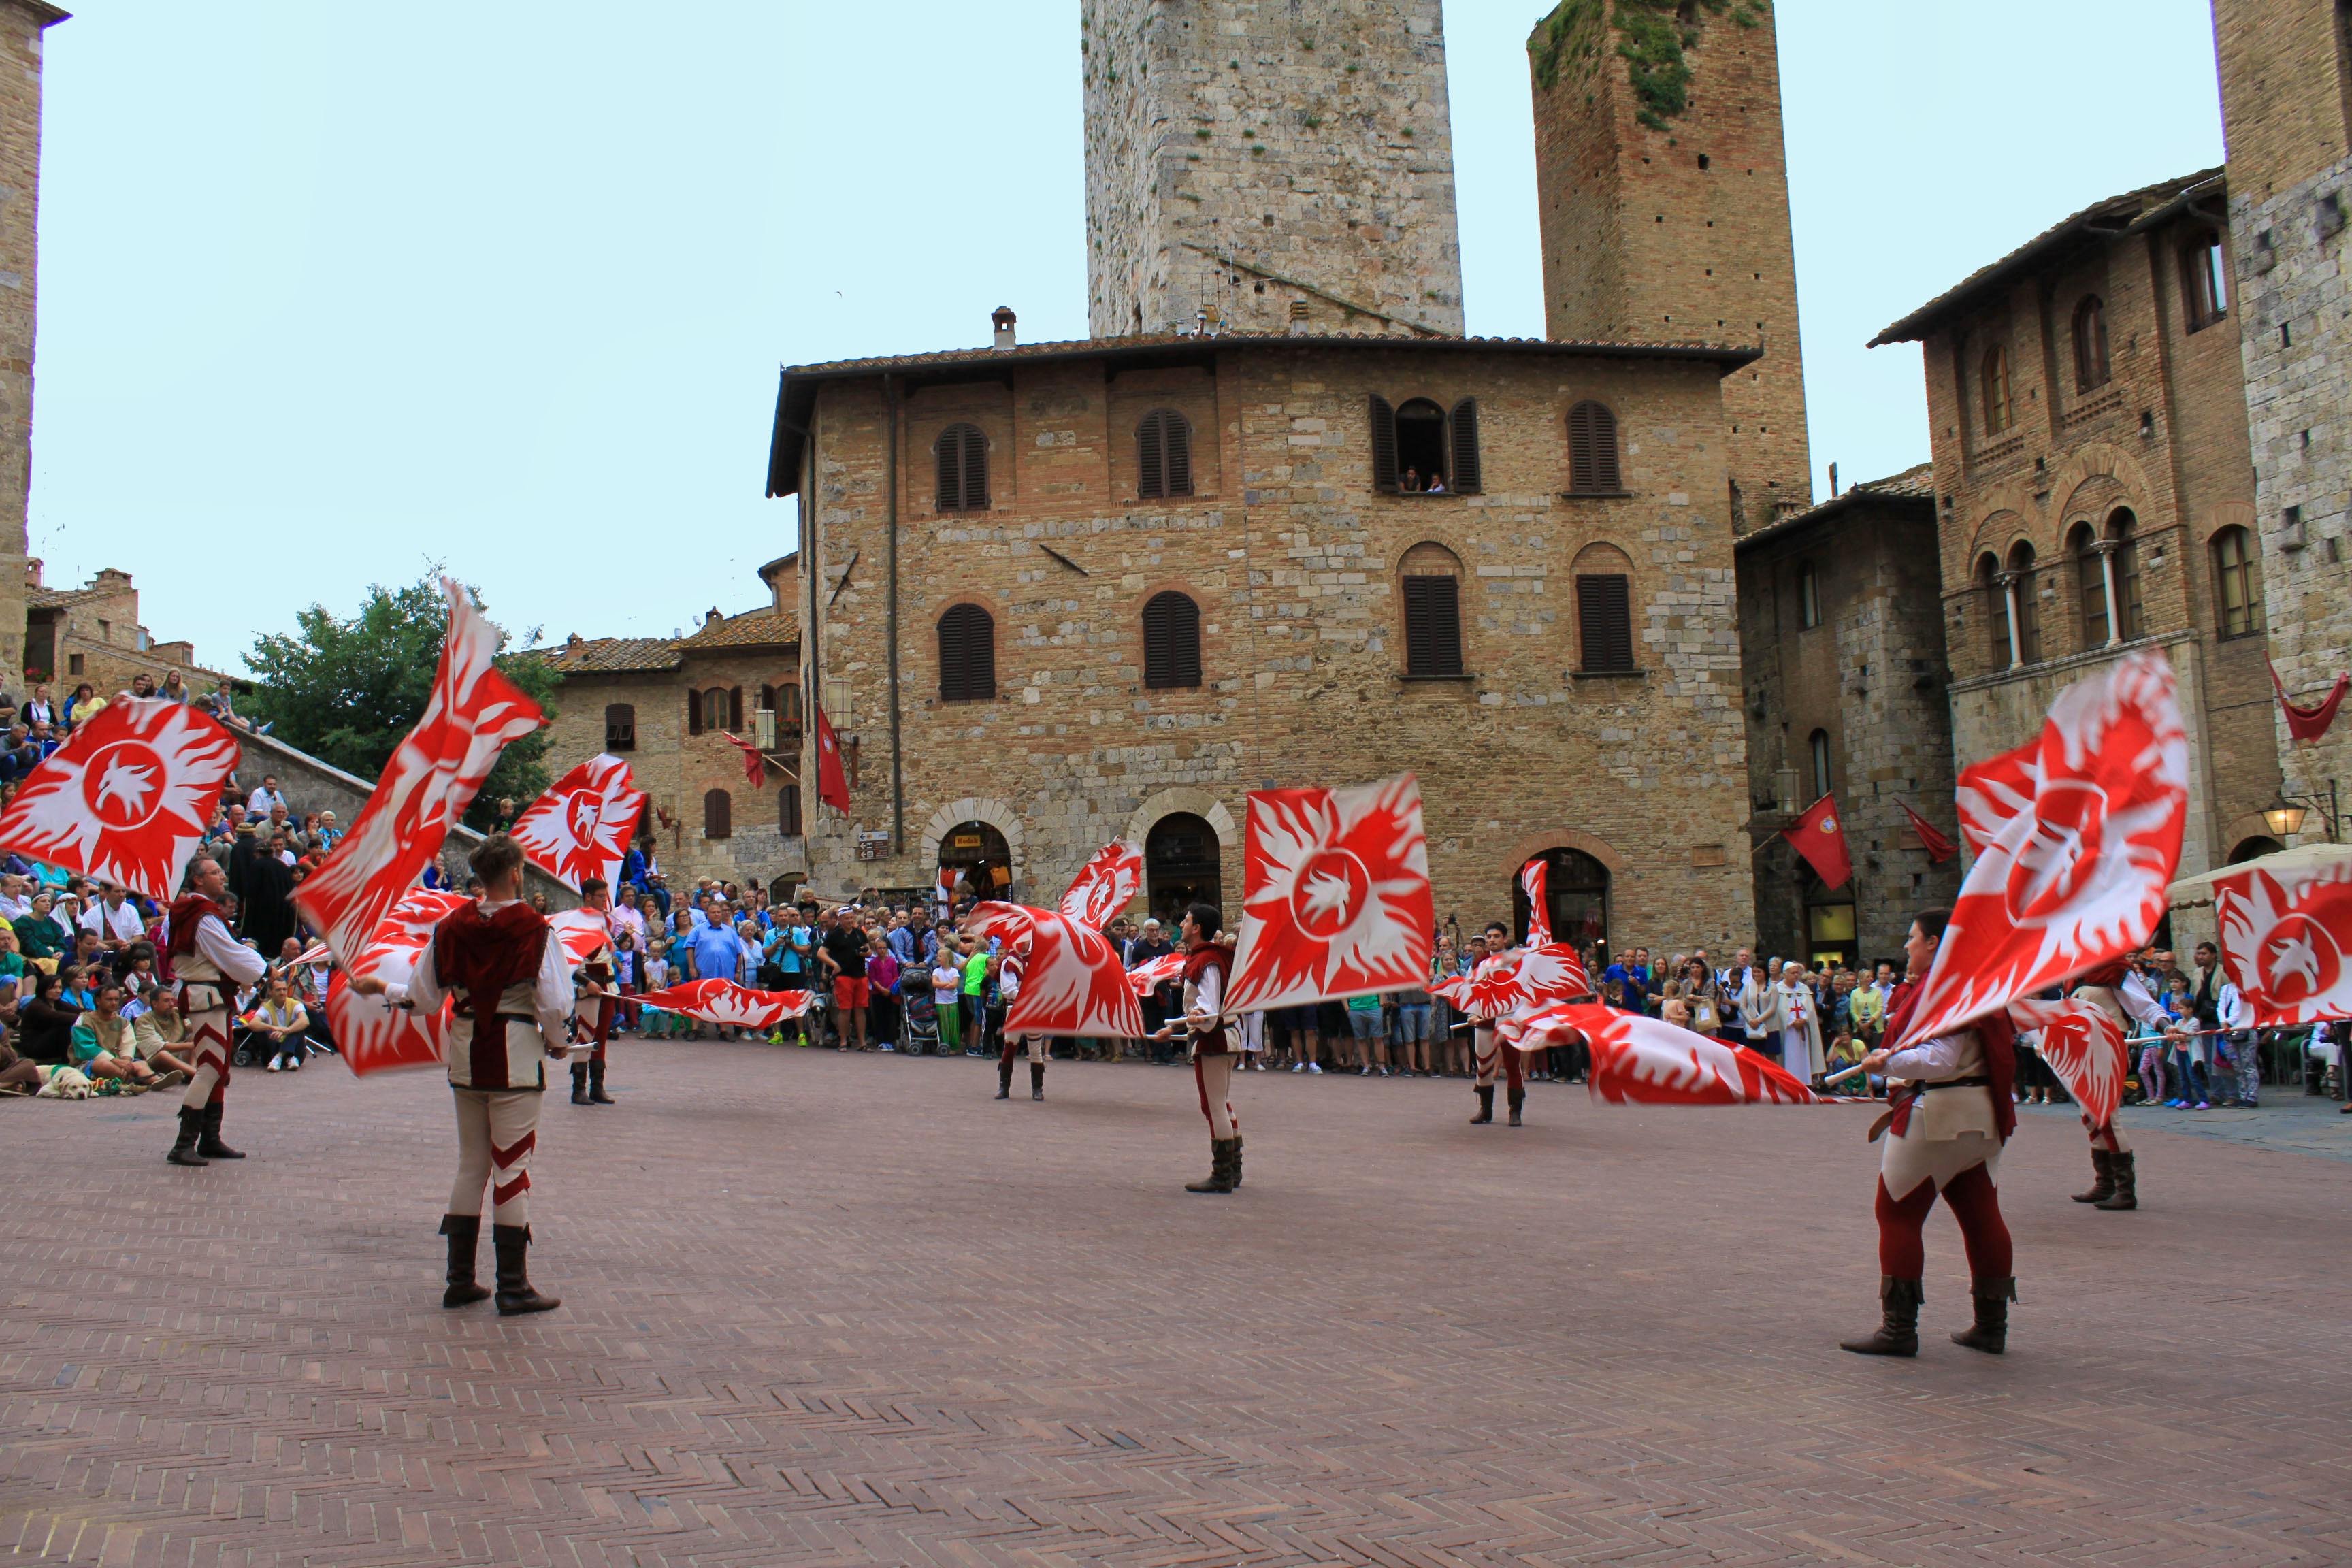 What To Do In San Gimignano Duomo Museums And Main Attractions In San Gimignano